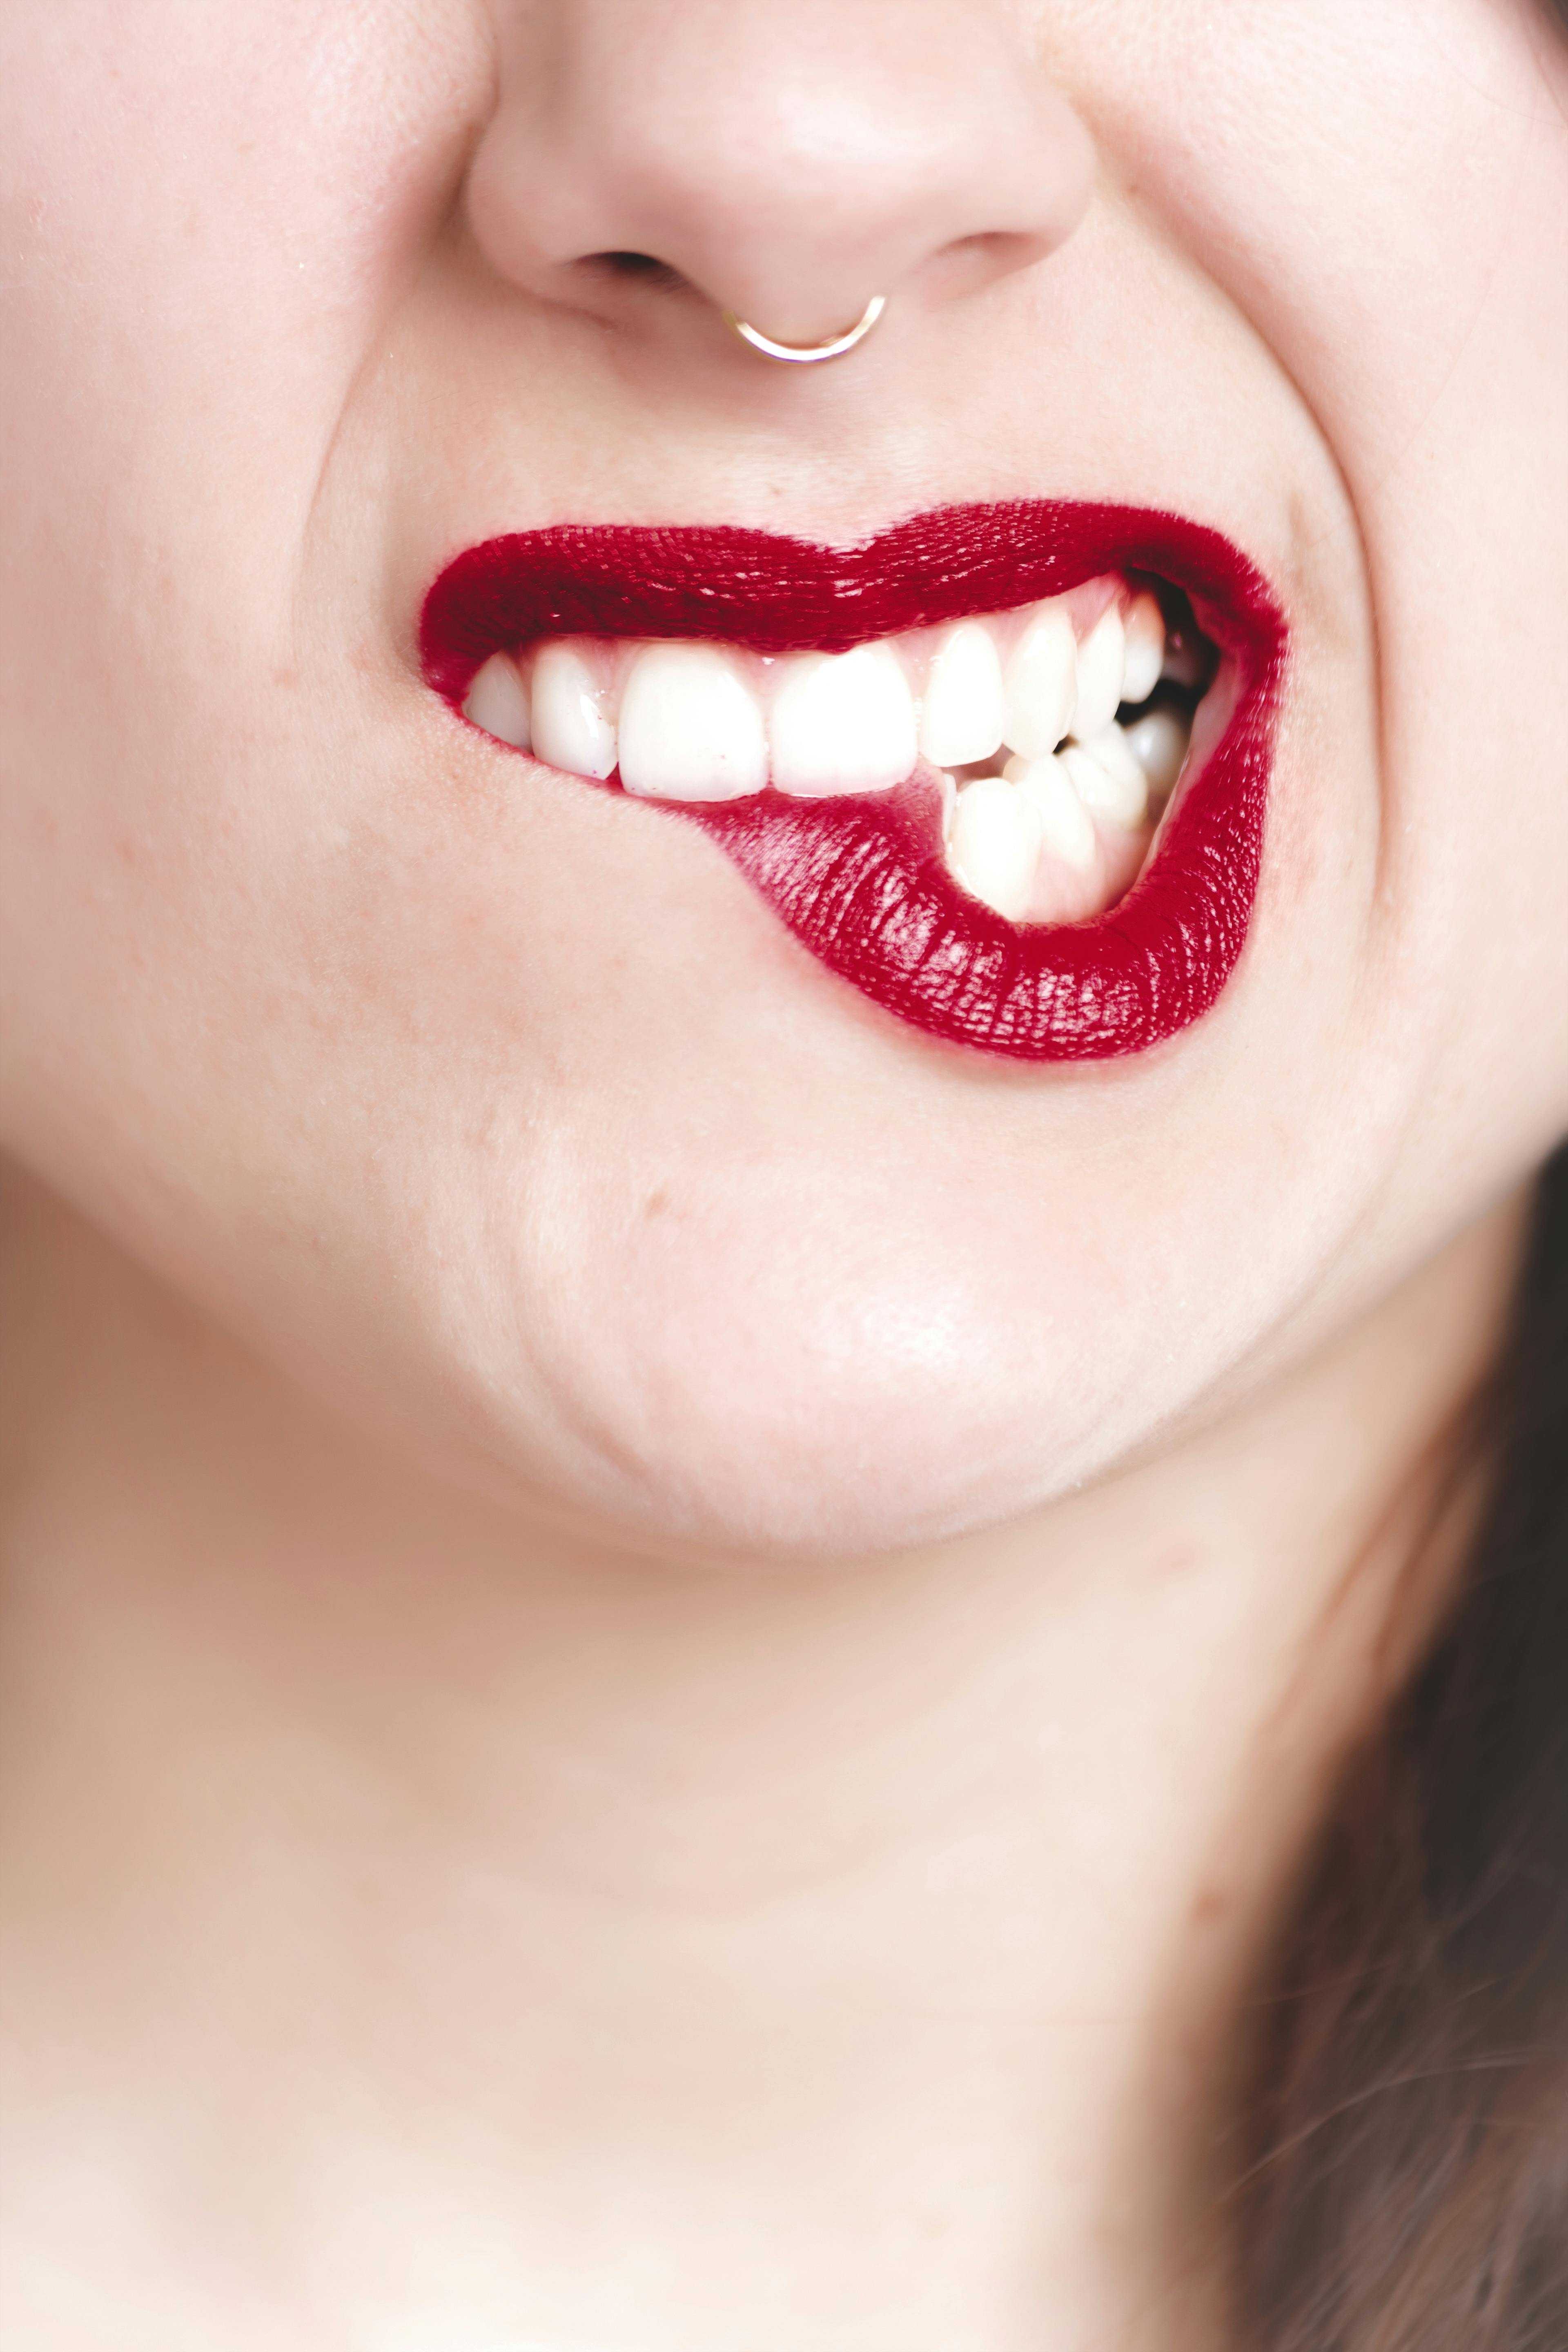 Woman With Wide Open Mouth and Tongue Out · Free Stock Photo